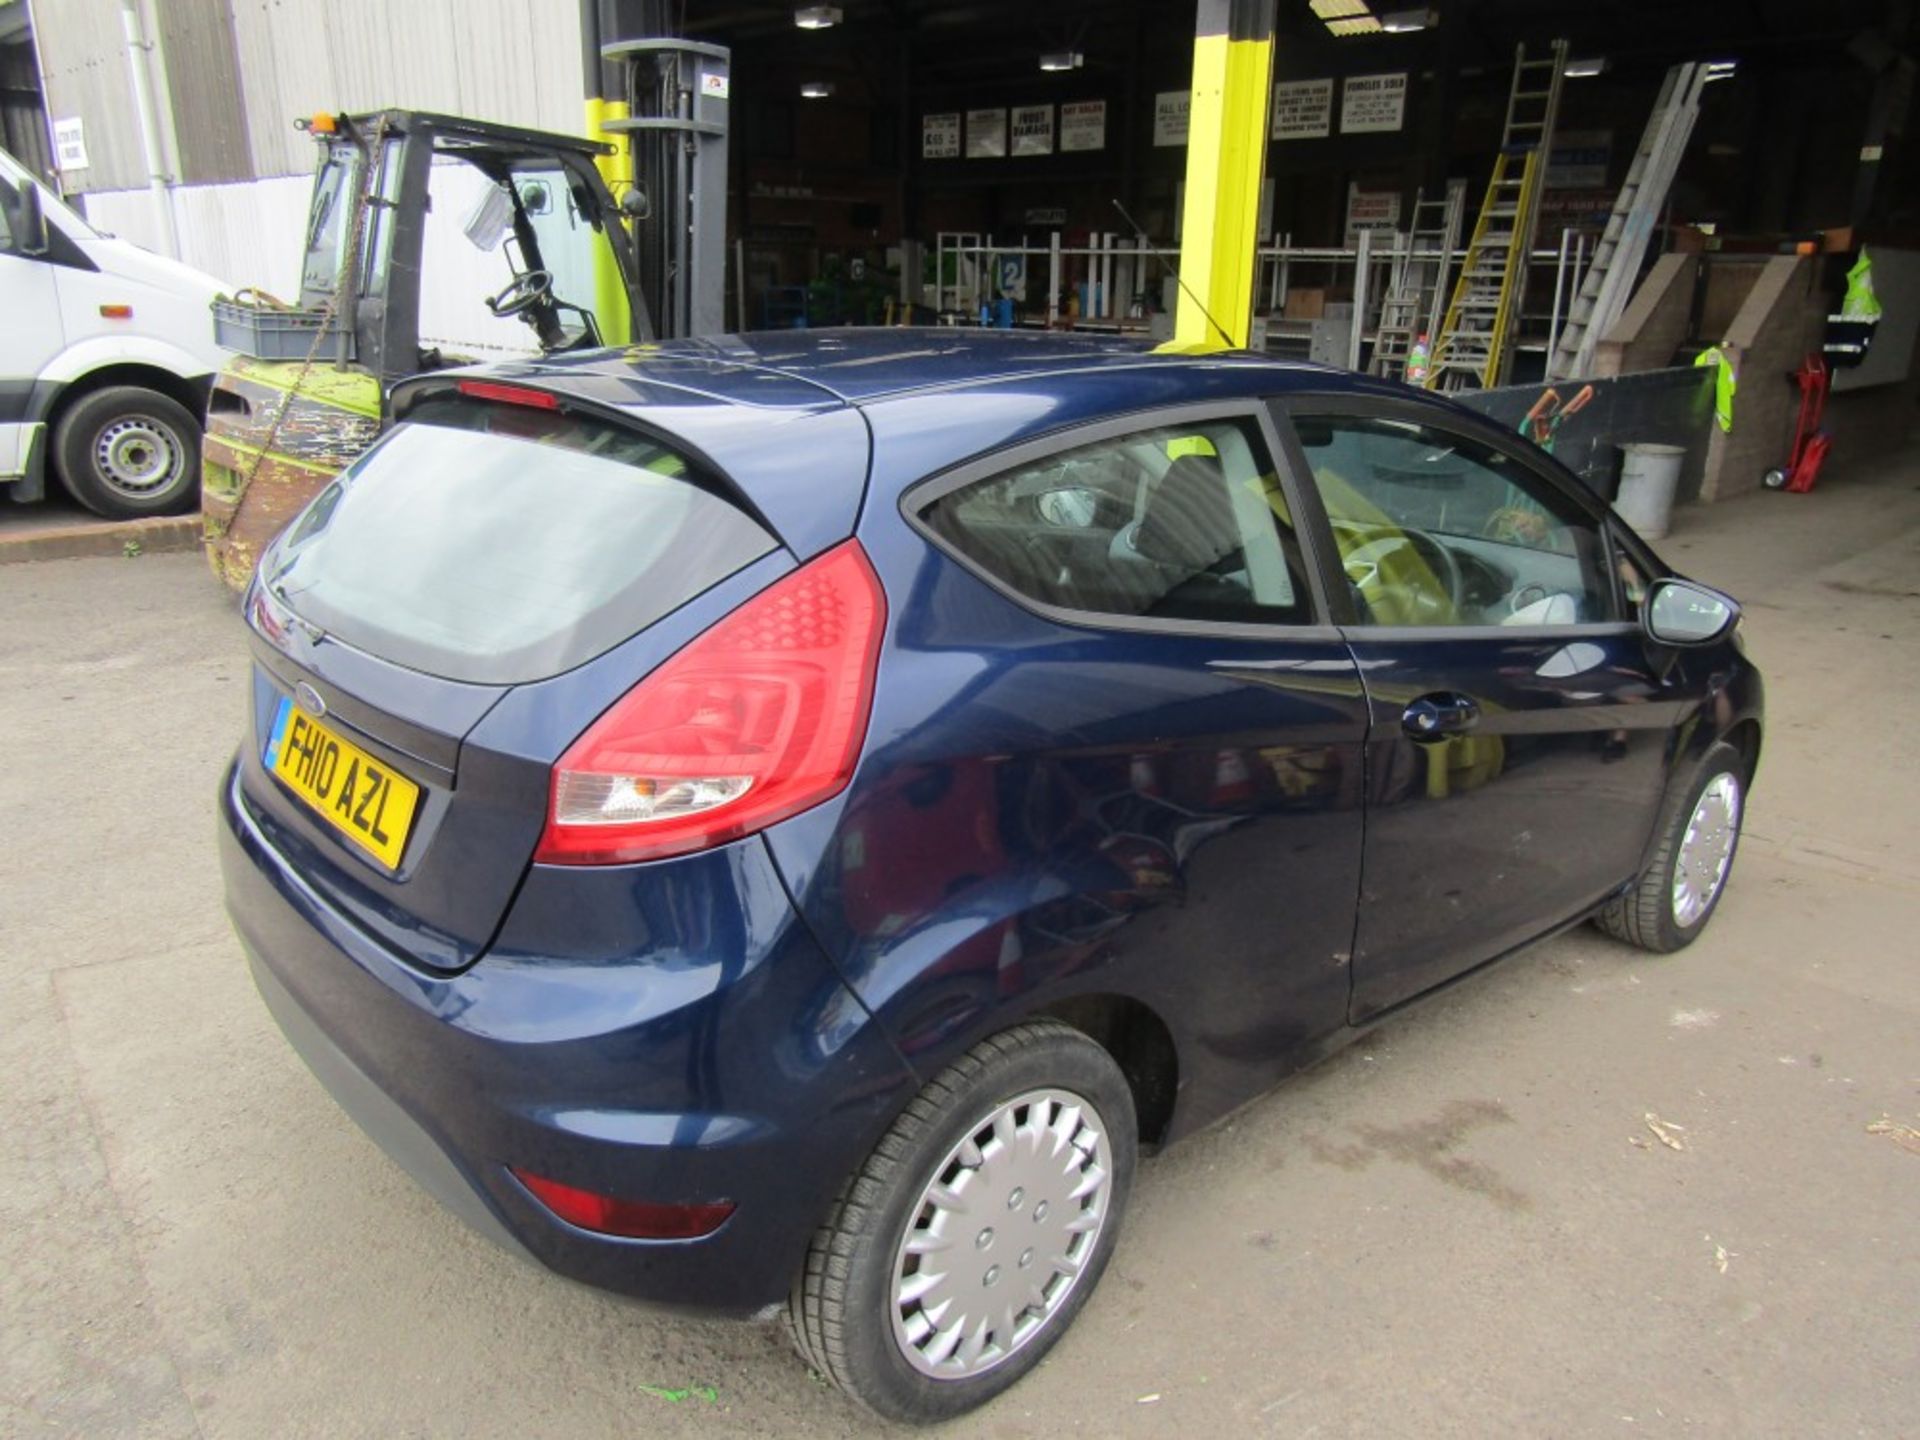 10 reg FORD FIESTA EDGE TDCI 68, 1ST REG 06/10, TEST 06/22, 116503M WARRANTED, V5 HERE, 1 OWNER FROM - Image 4 of 6